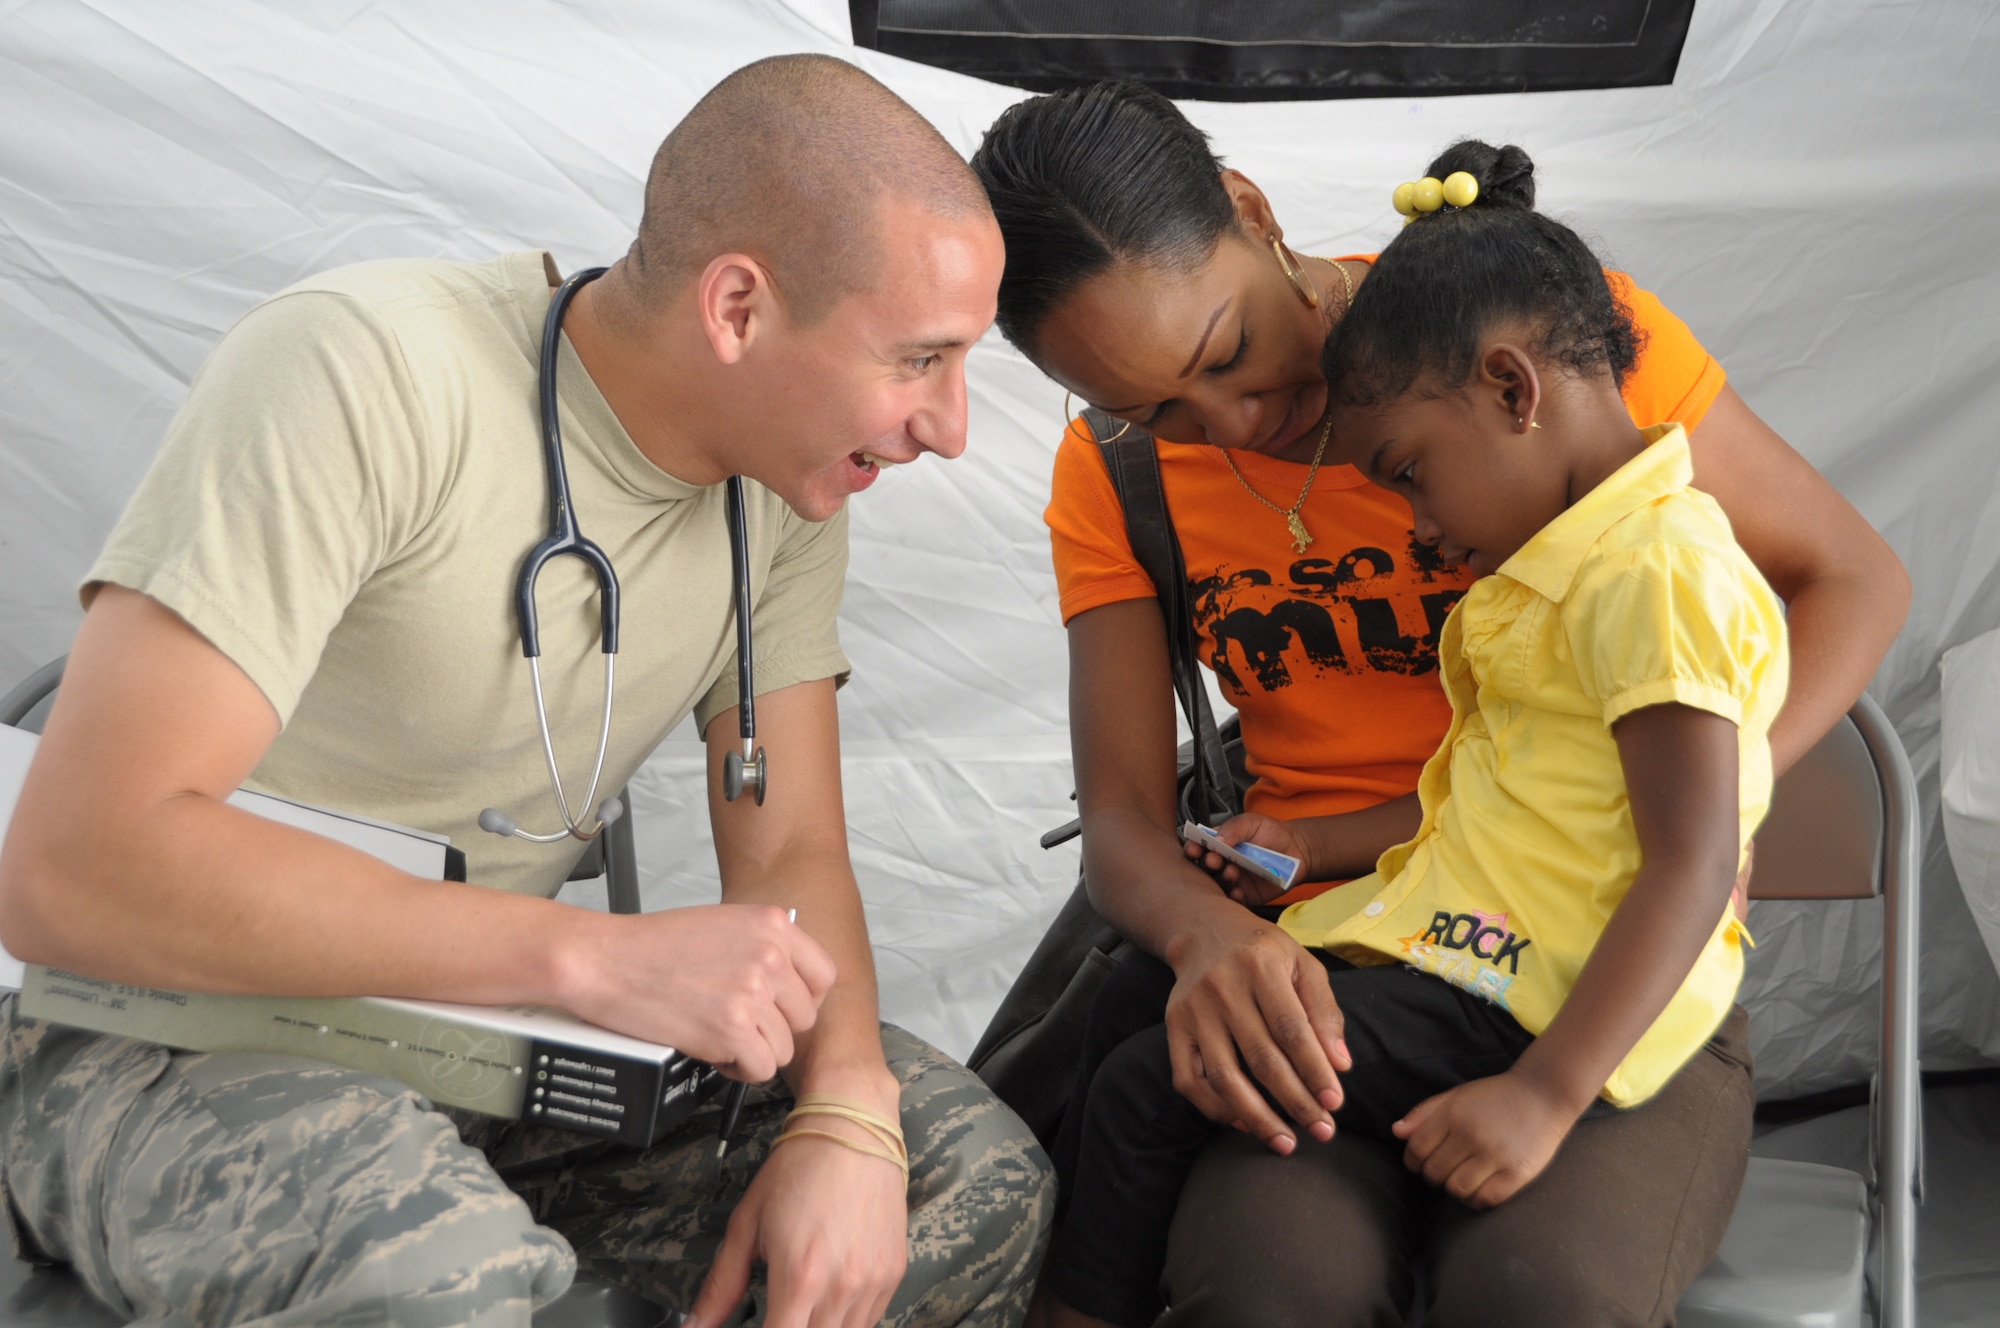 U.S. Air Force Capt. Brian Montenegro, 60th Medical Group Pediatrician, talks to Gabriella Alexander, 3, at Cumuto Barracks in Trinidad and Tobago April 9, 2011. Montenegro is a part of the Expeditionary Medical Support Health Response Team in support of the Allied Forces Humanitarian Exercise/Fuerzas Aliadas or FA HUM 2011. (U.S. Air Force photo by 2d Lt Joel Banjo-Johnson/Released)